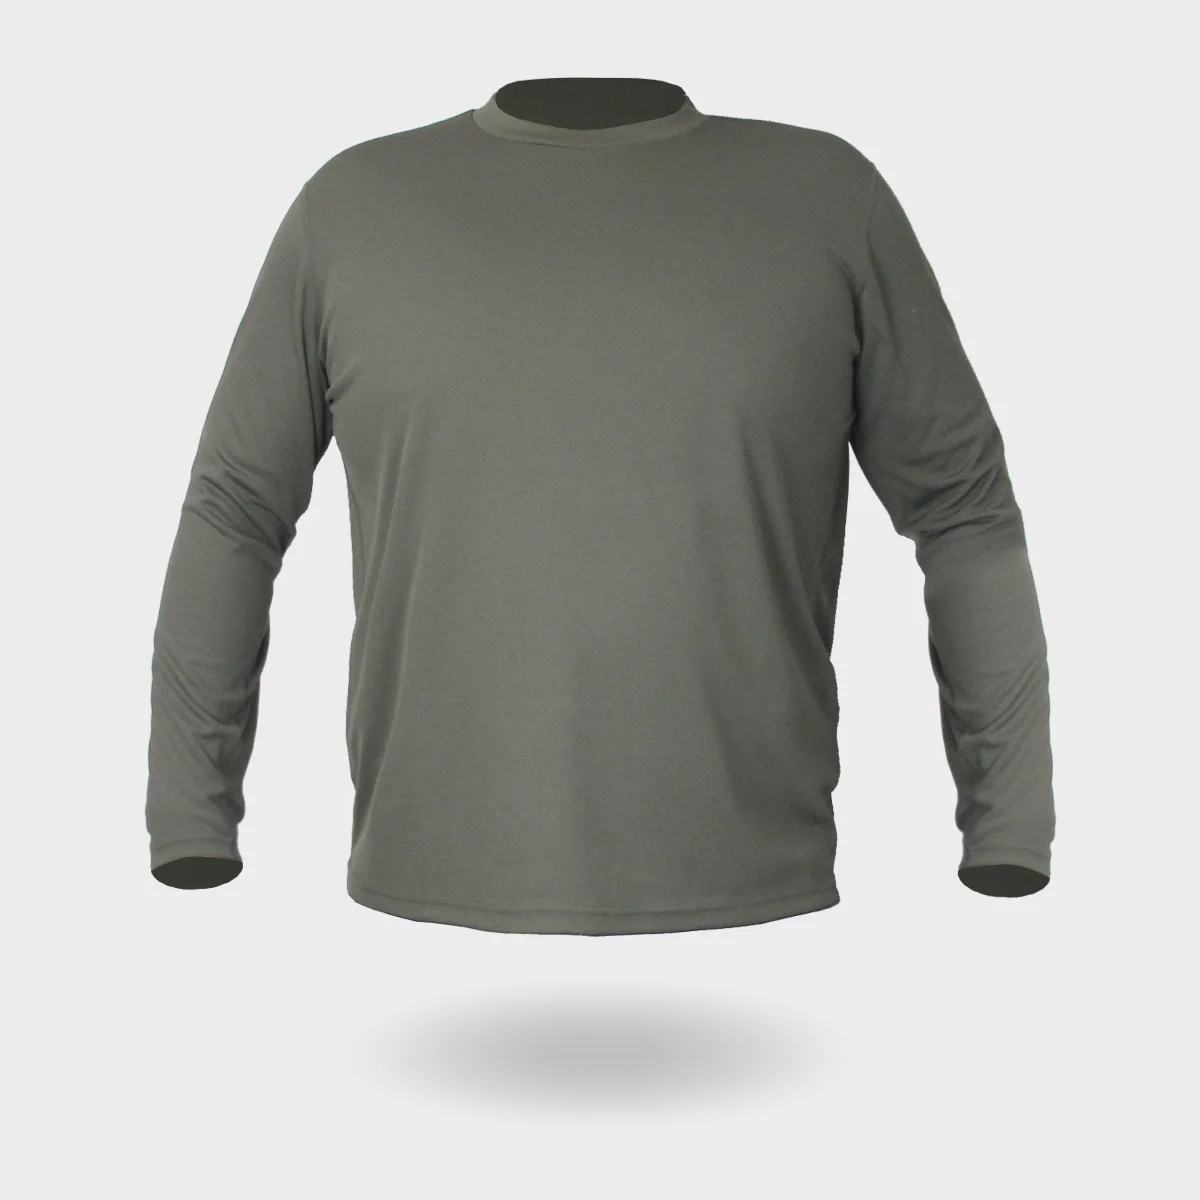 New Men's Outdoor Sports Quick Drying Sweat Wicking Long Sleeve Round Neck Top( BK+RG+WG) 3 Pieces